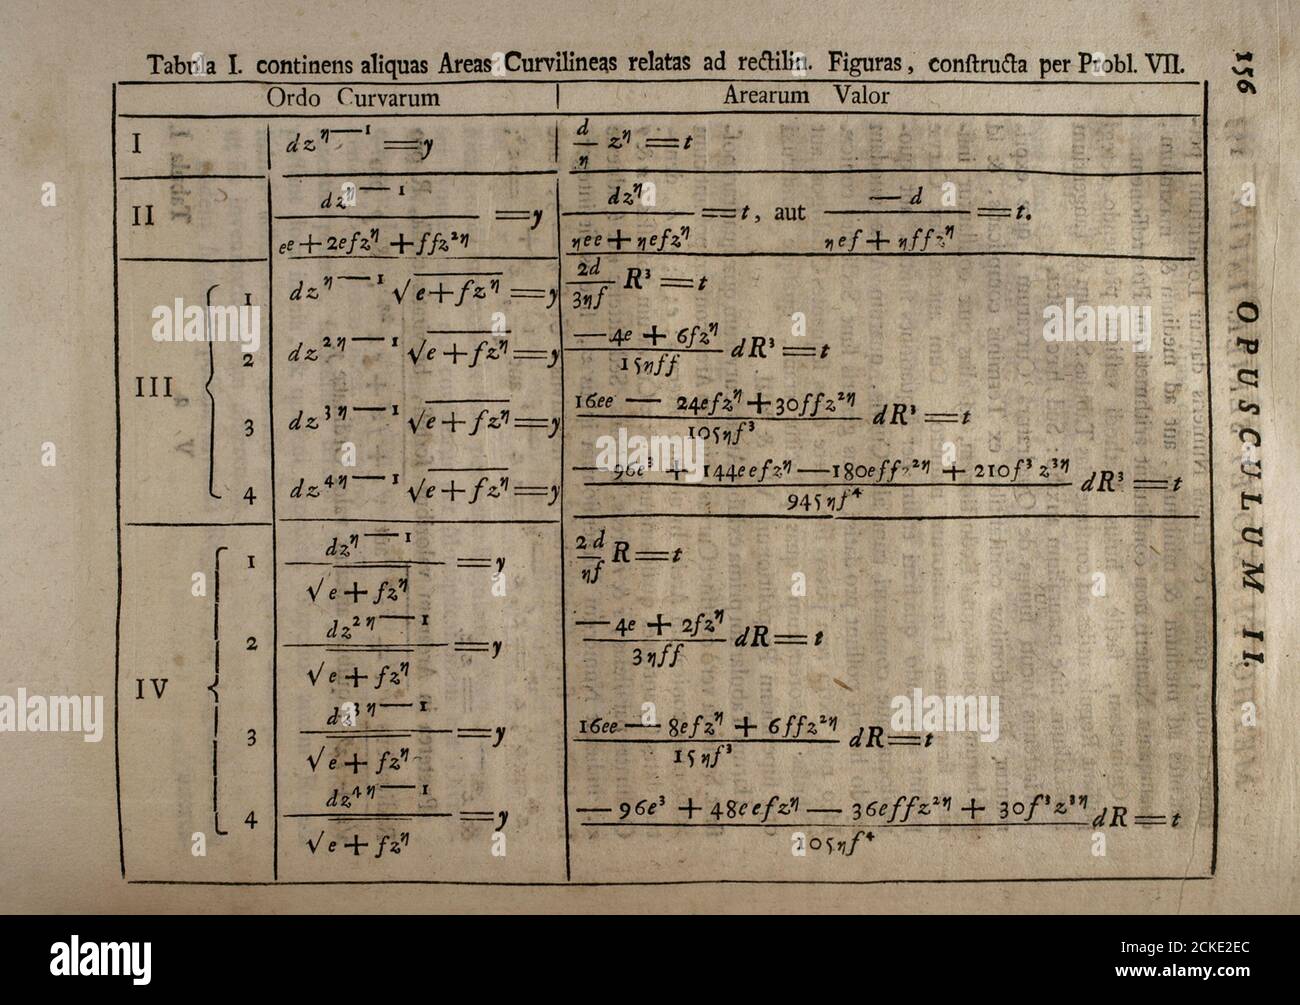 Isaac Newton (1642-1727). English physicist, astronomer and mathematician. 'Opuscula Mathematica, Philosophica et Philologica'. Volume I: Mathematica. Inside page with mathematical calculations. Published in Lausanne and Geneva, 1744. Newton's original work dates from 1686. Stock Photo